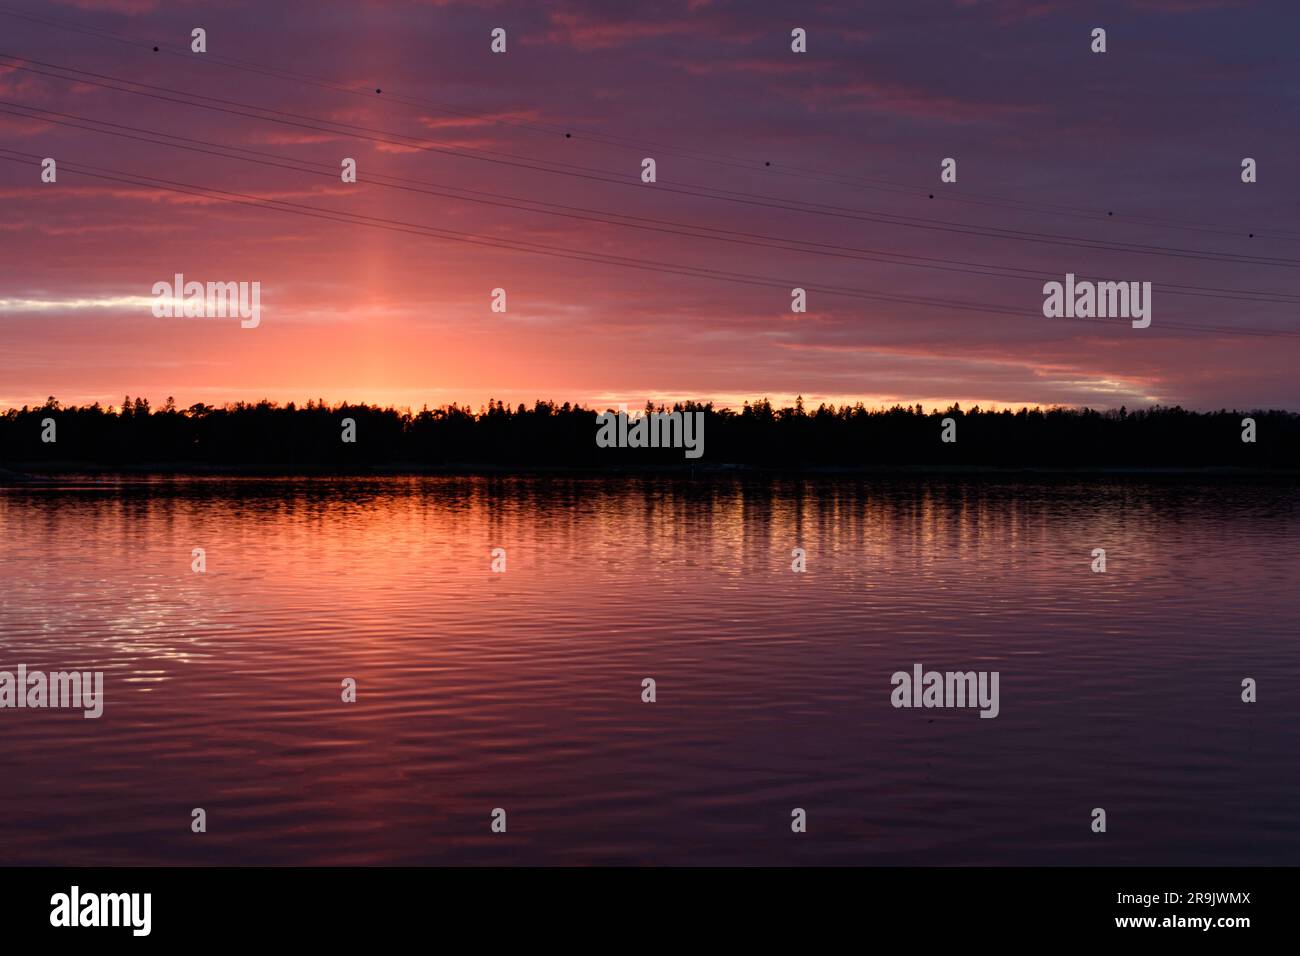 The coastline of islands near Helsinki, at sunset, a red glow in the sky. Stock Photo